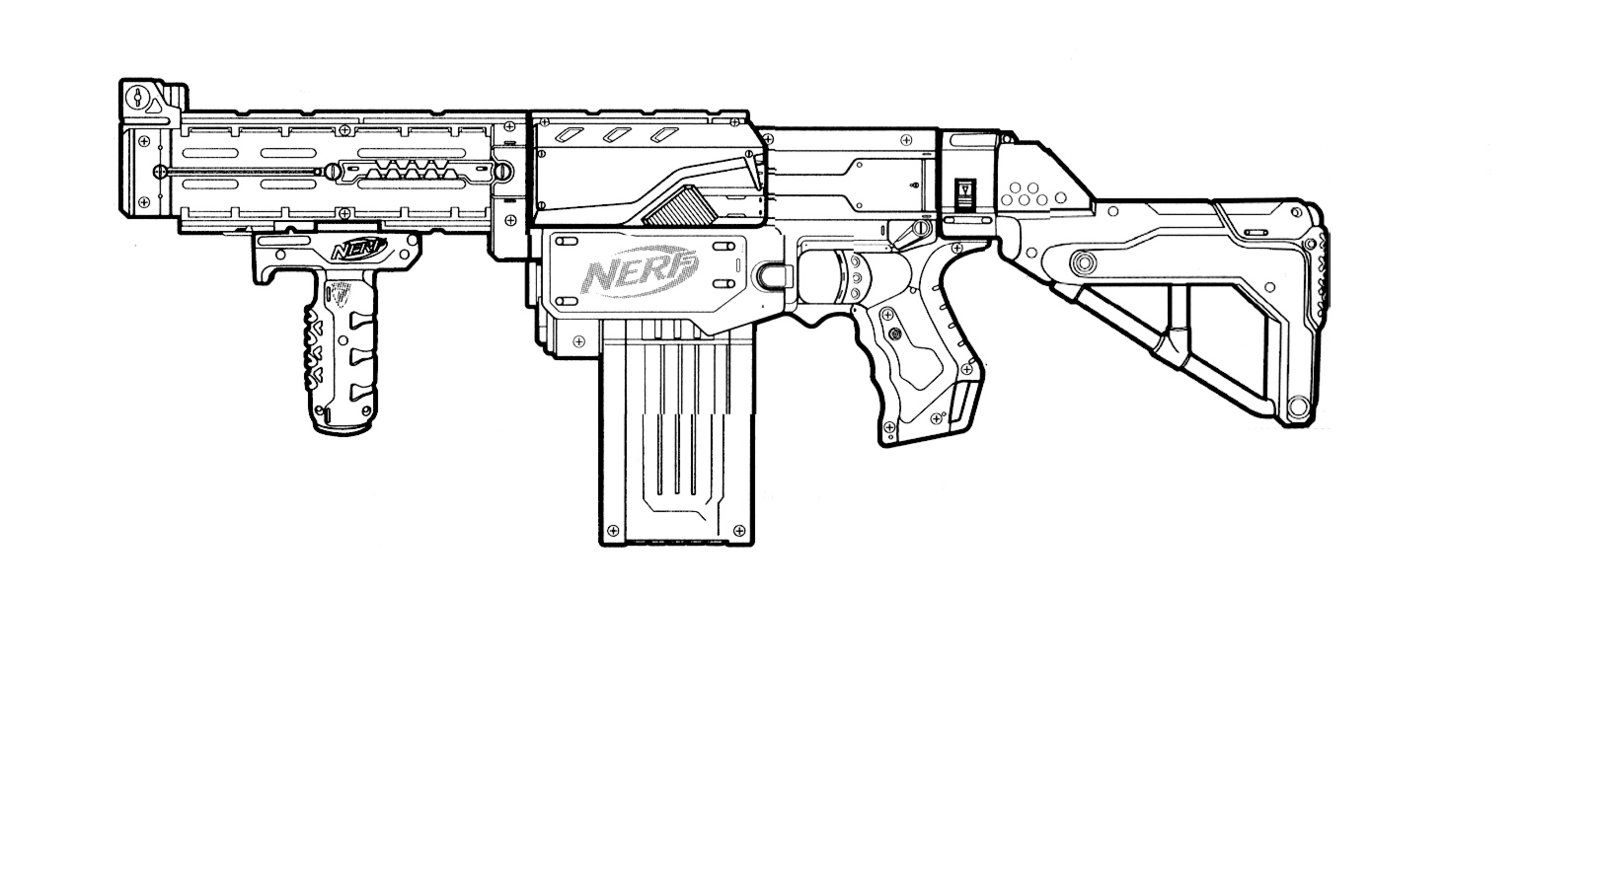 Nerf gun coloring pages